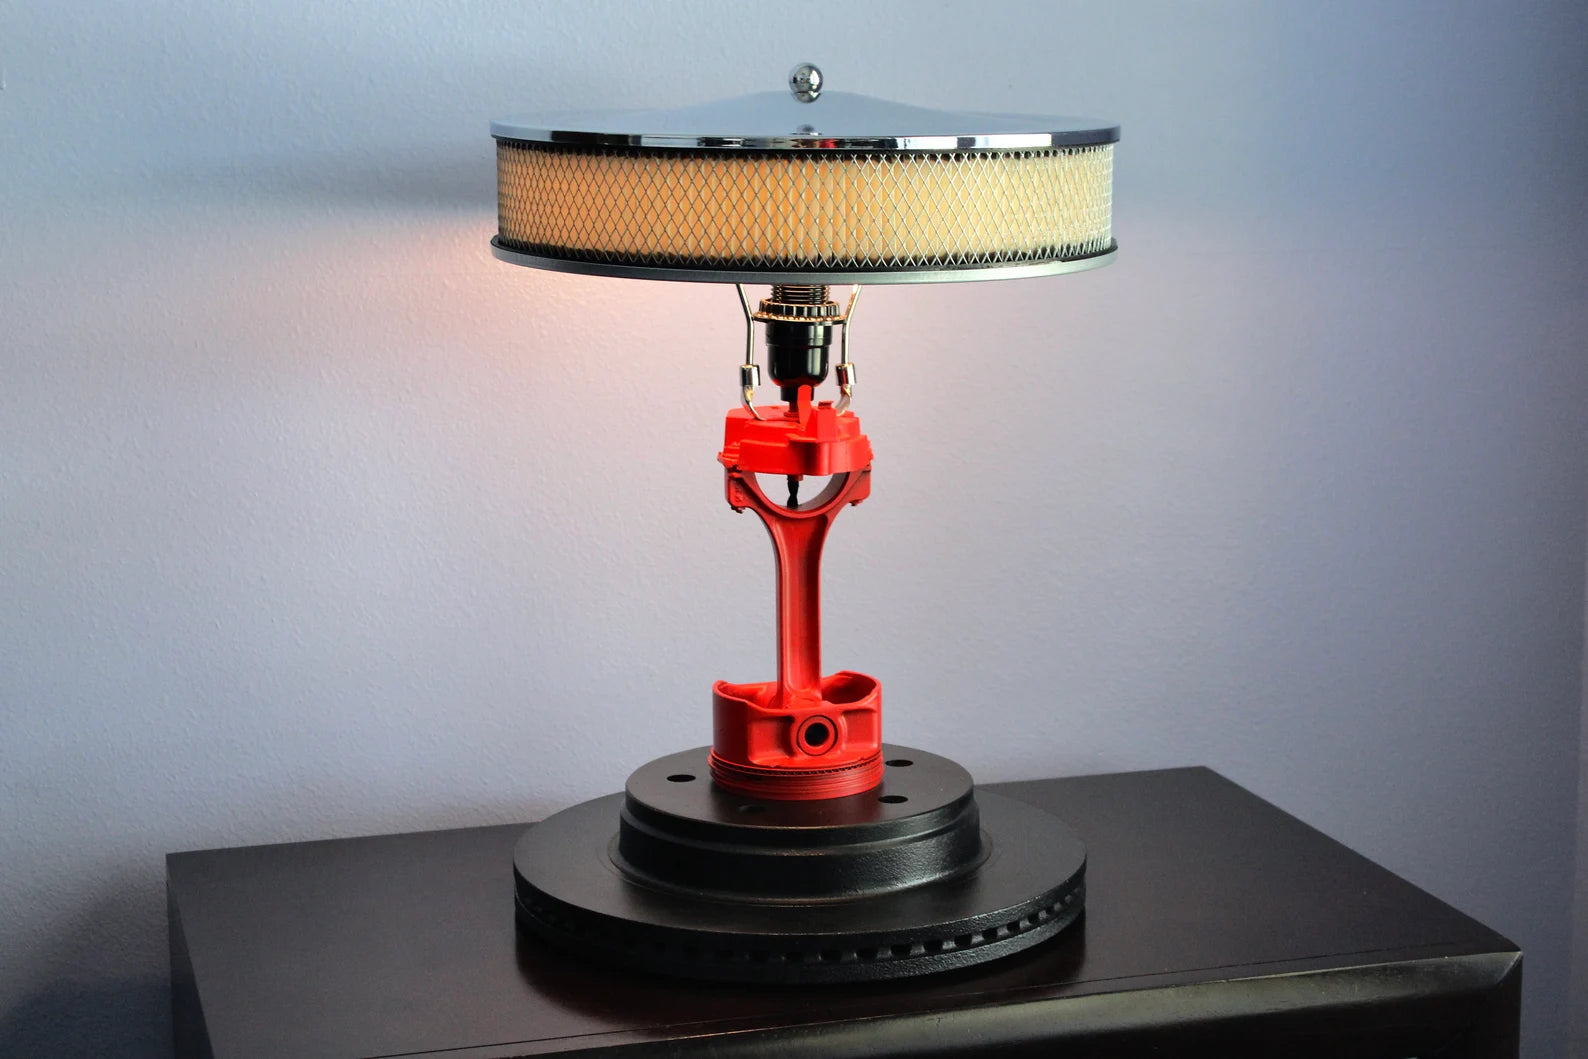 Piston and Air Filter Desk Lamp - Chrome Air Filter